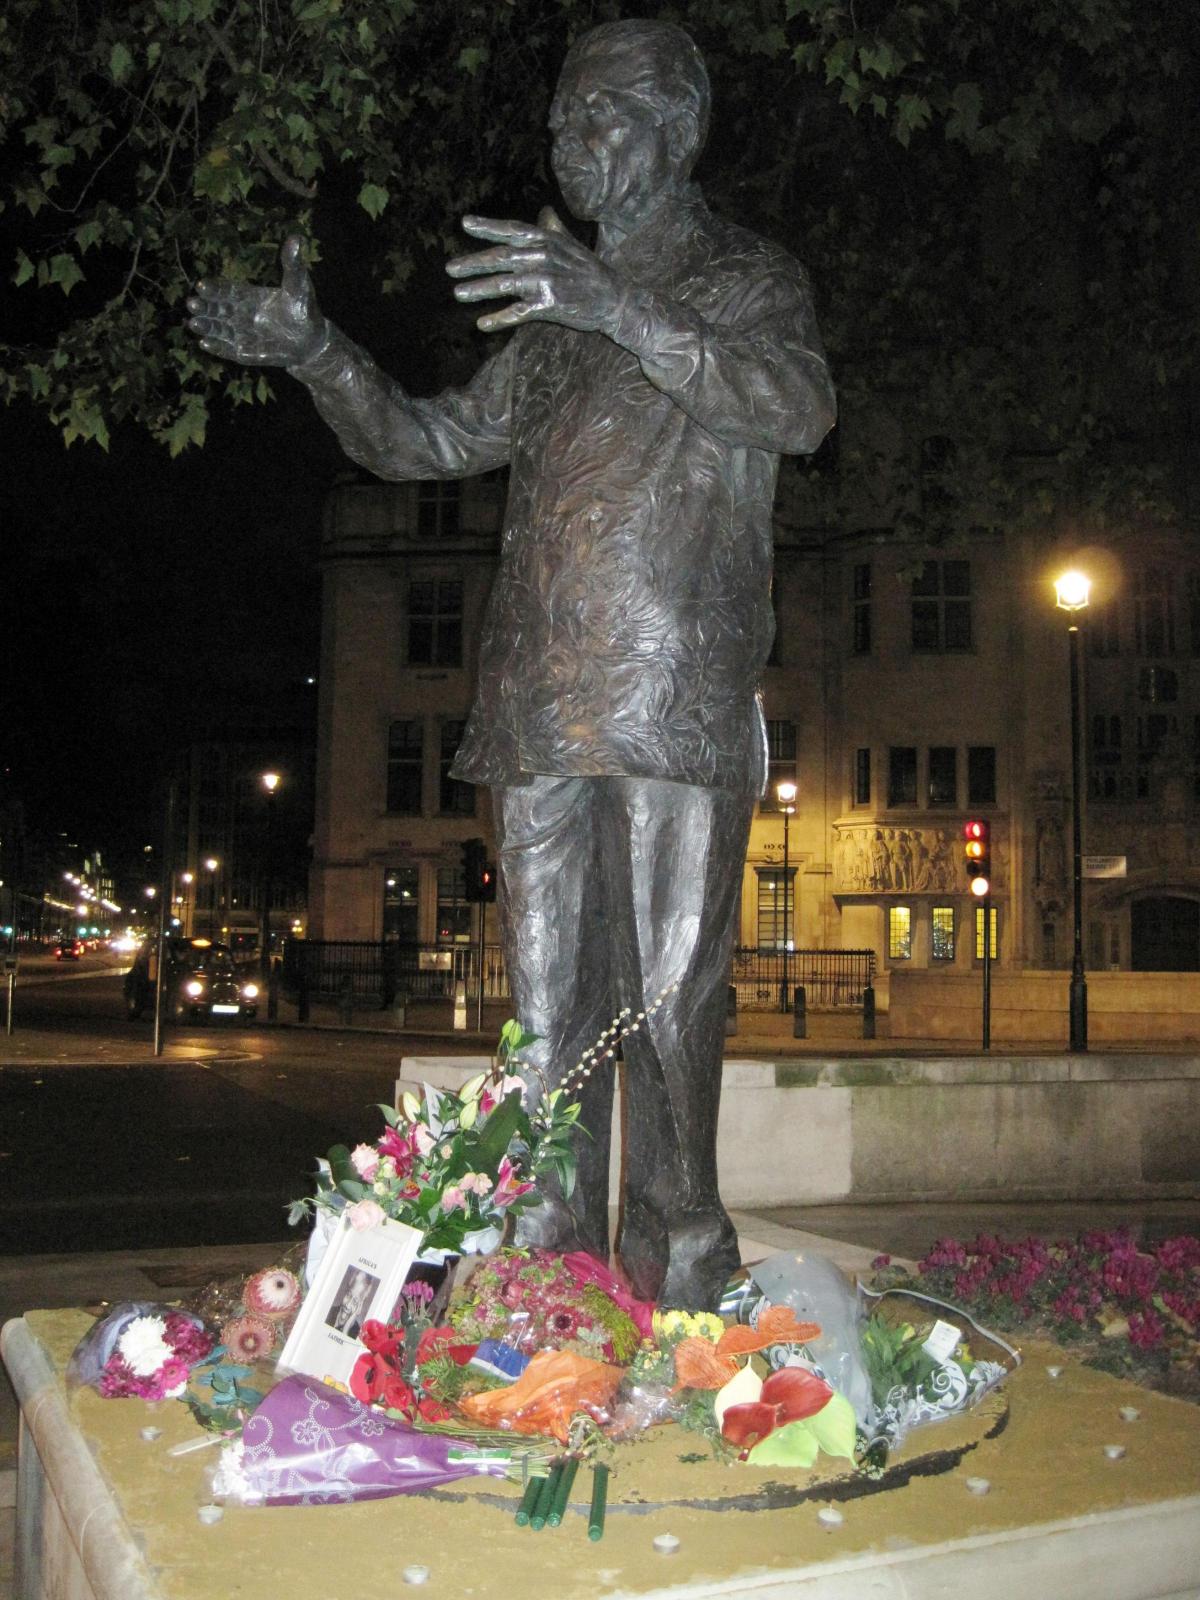 Floral tributes are placed by the statue of Nelson Mandela in parliament Square, central London 